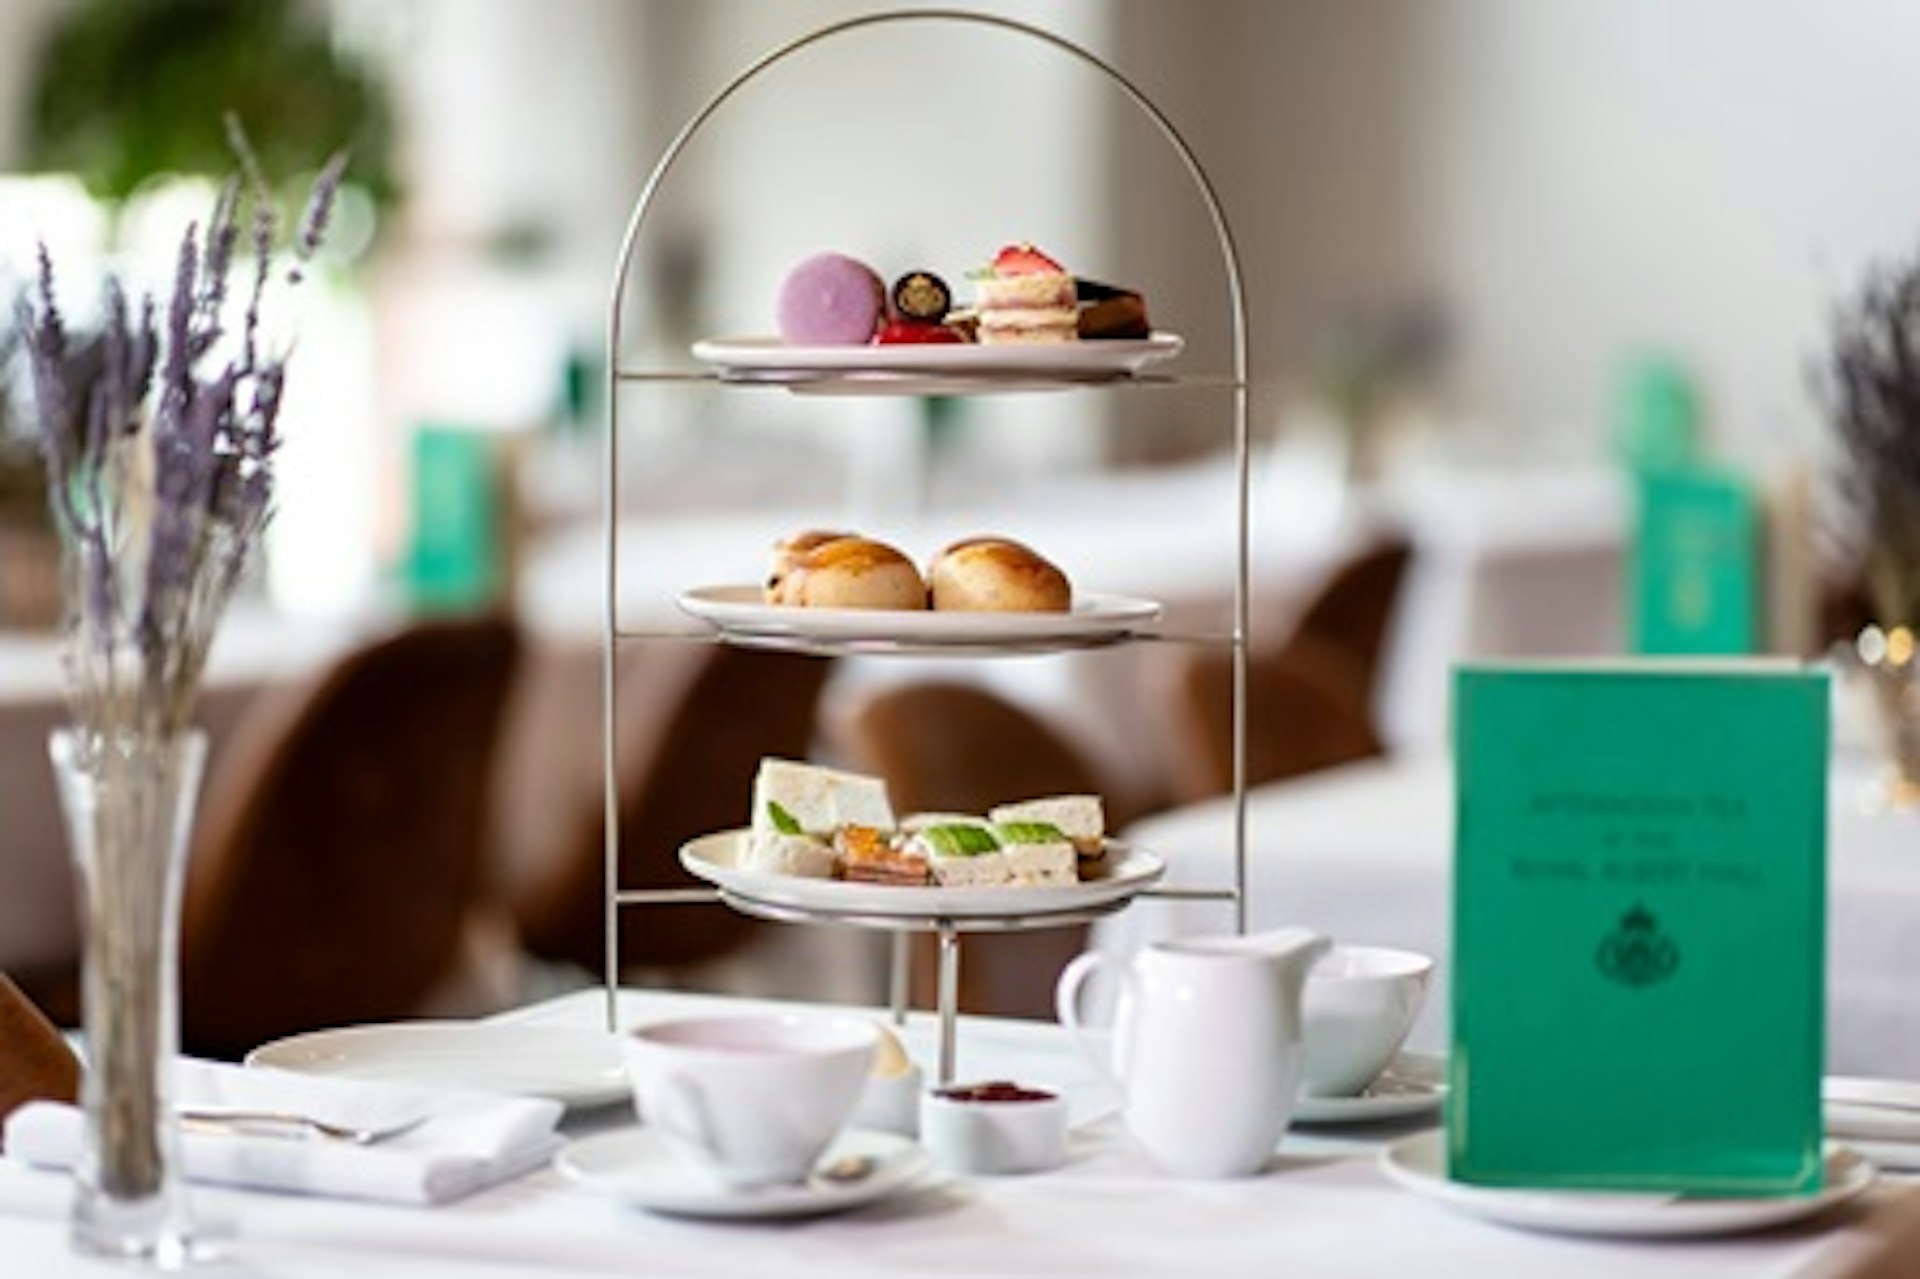 Afternoon Tea for Two at the Royal Albert Hall 1